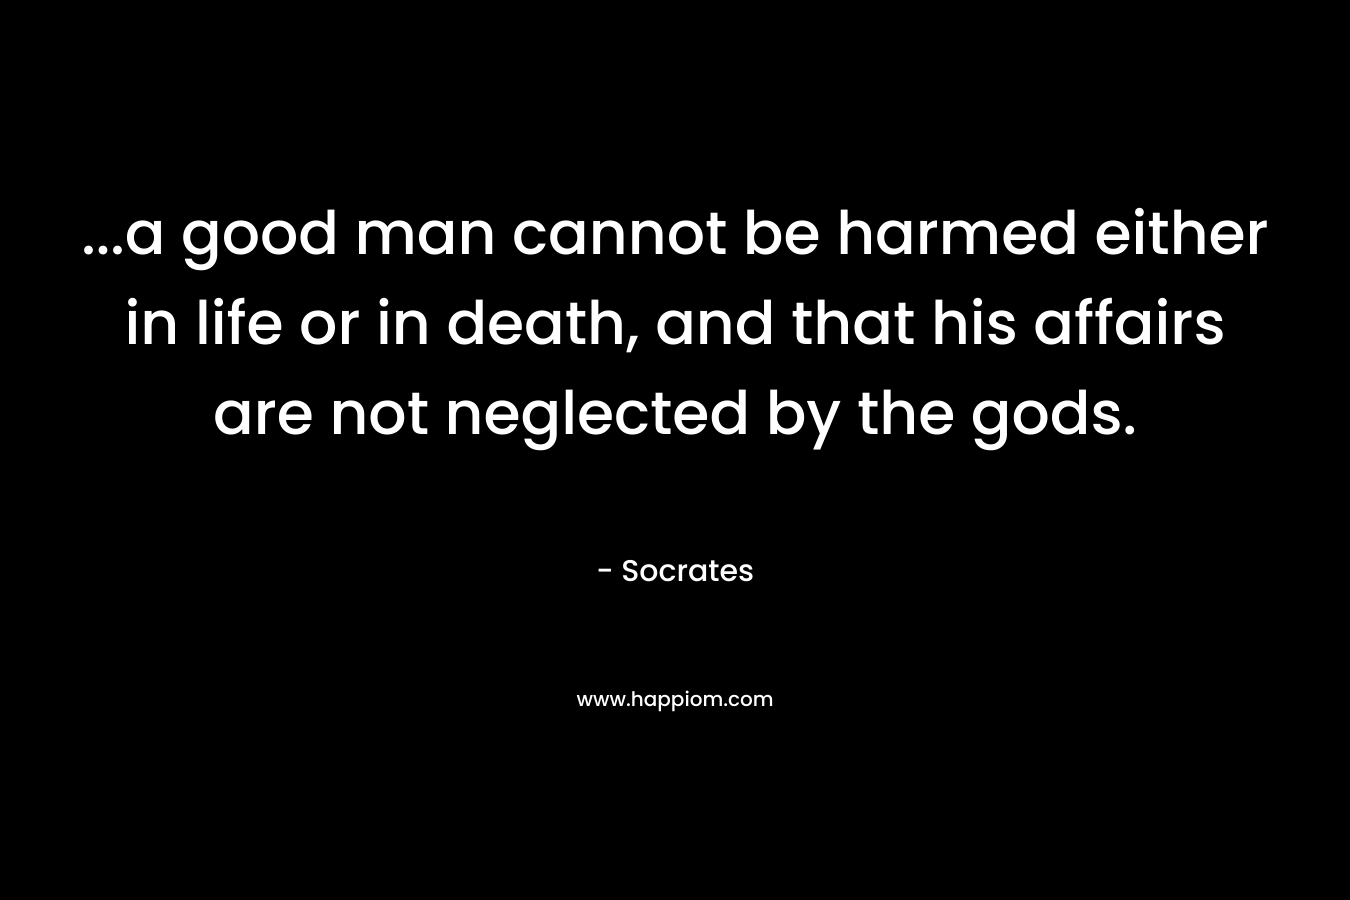 ...a good man cannot be harmed either in life or in death, and that his affairs are not neglected by the gods.